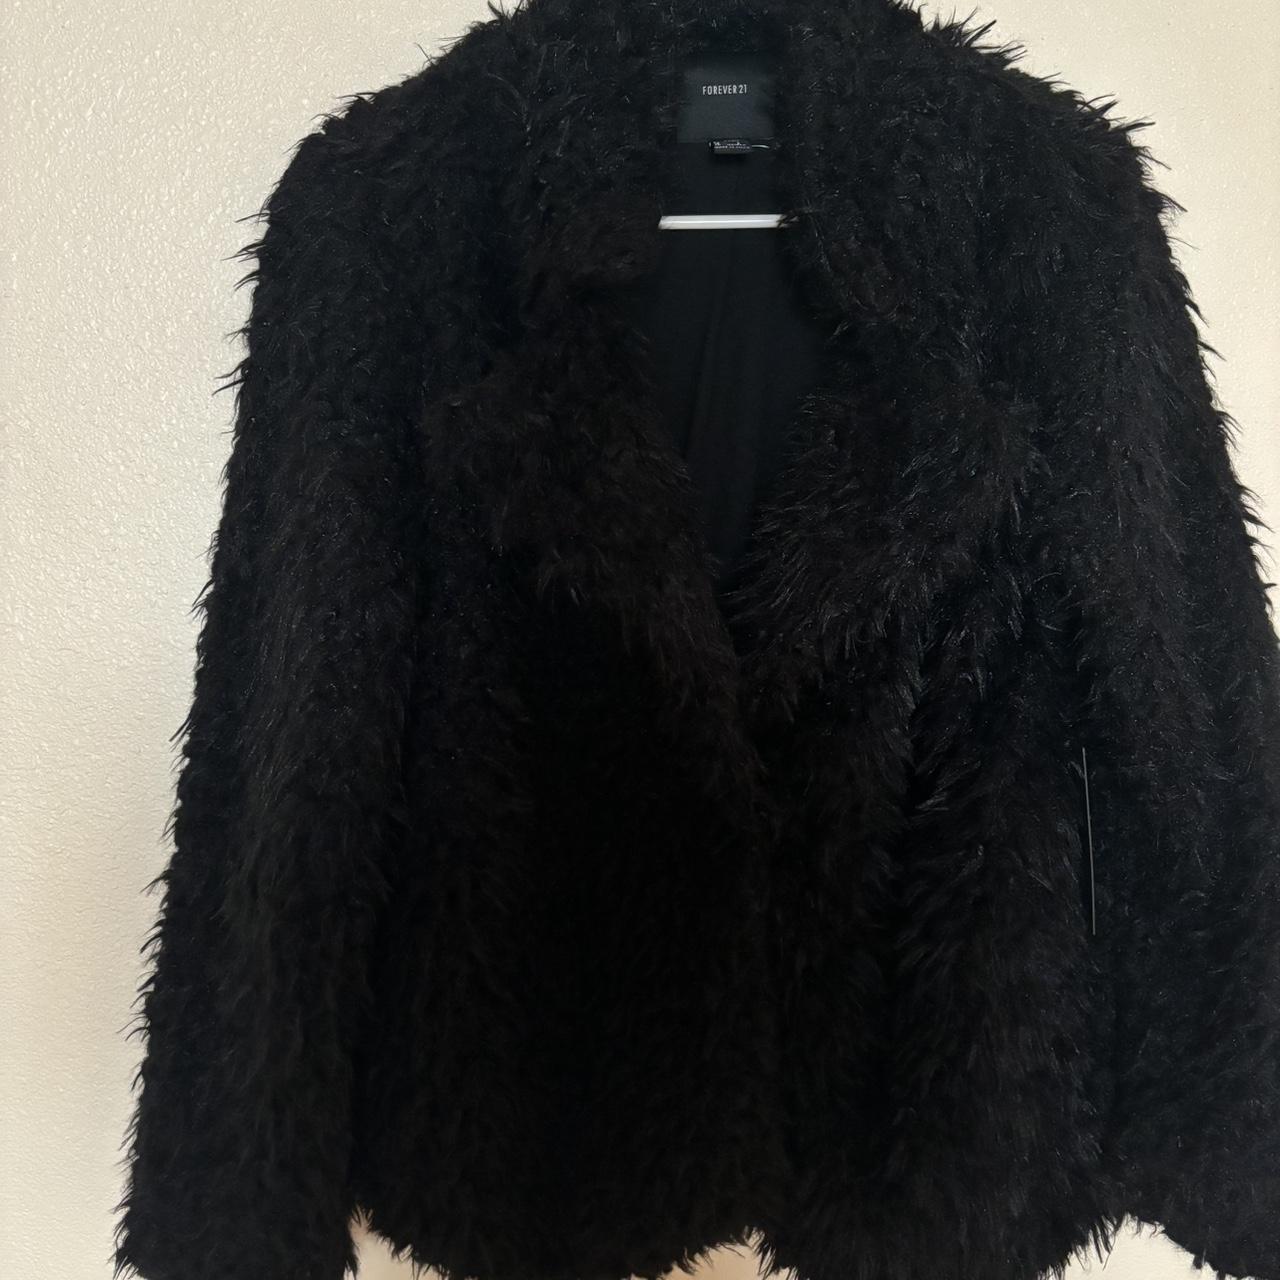 Black Shaggy Faux Fur Coat Brand new with tags and... - Depop